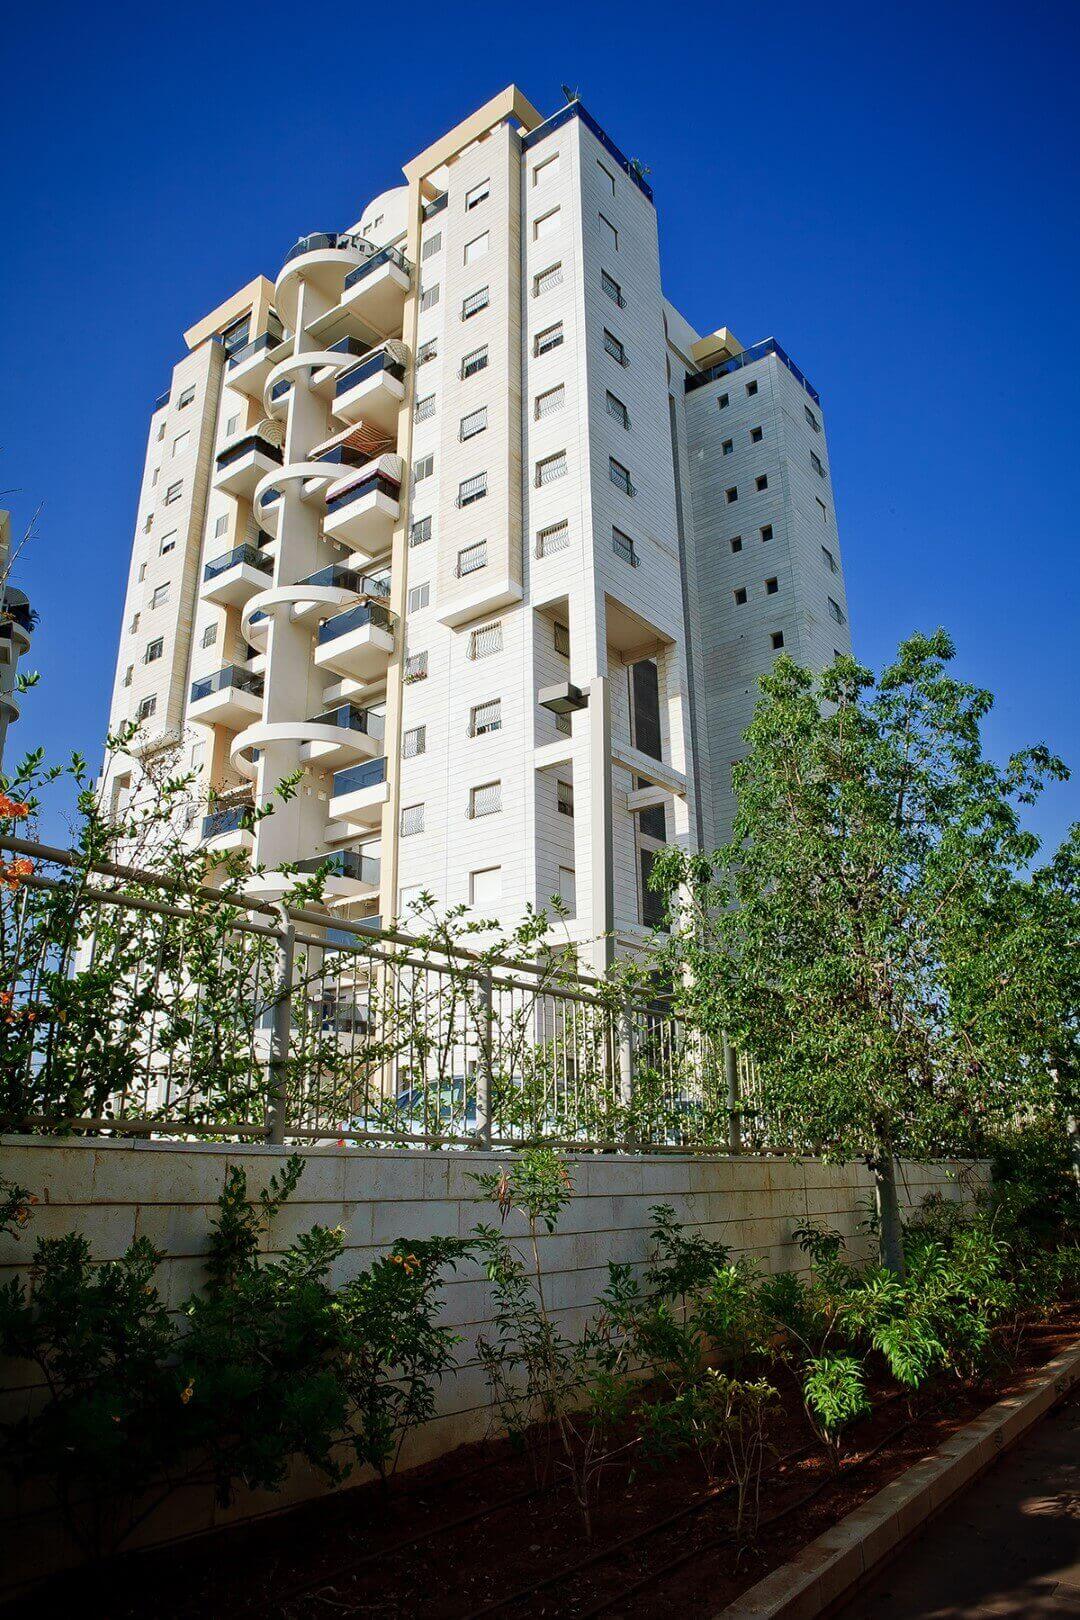 Photo of a building of the Kiryat Nobel laureate project in Rishon Lezion